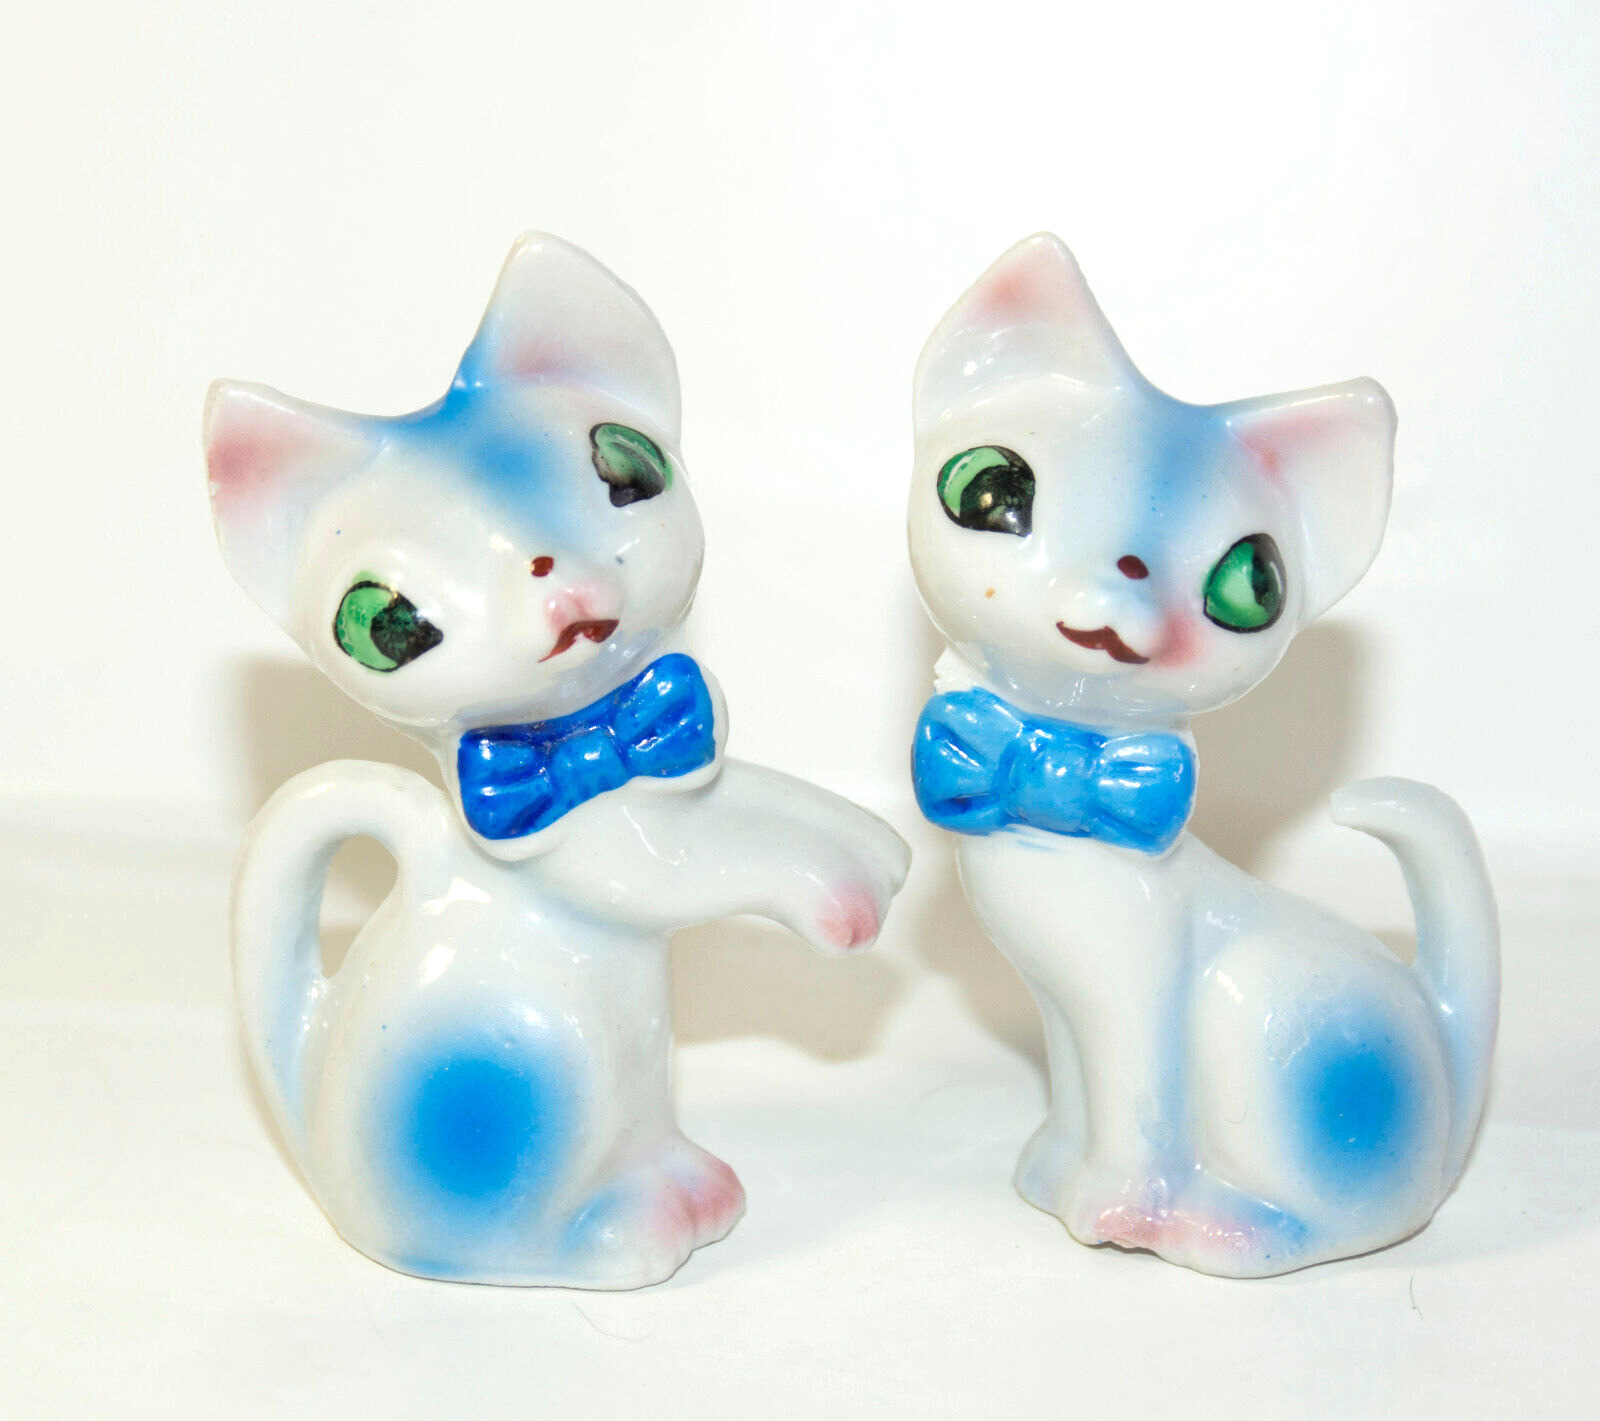 2 Vintage Anthropomorphic Cat Figurines White Blue Bows Kitsch Hand Painted